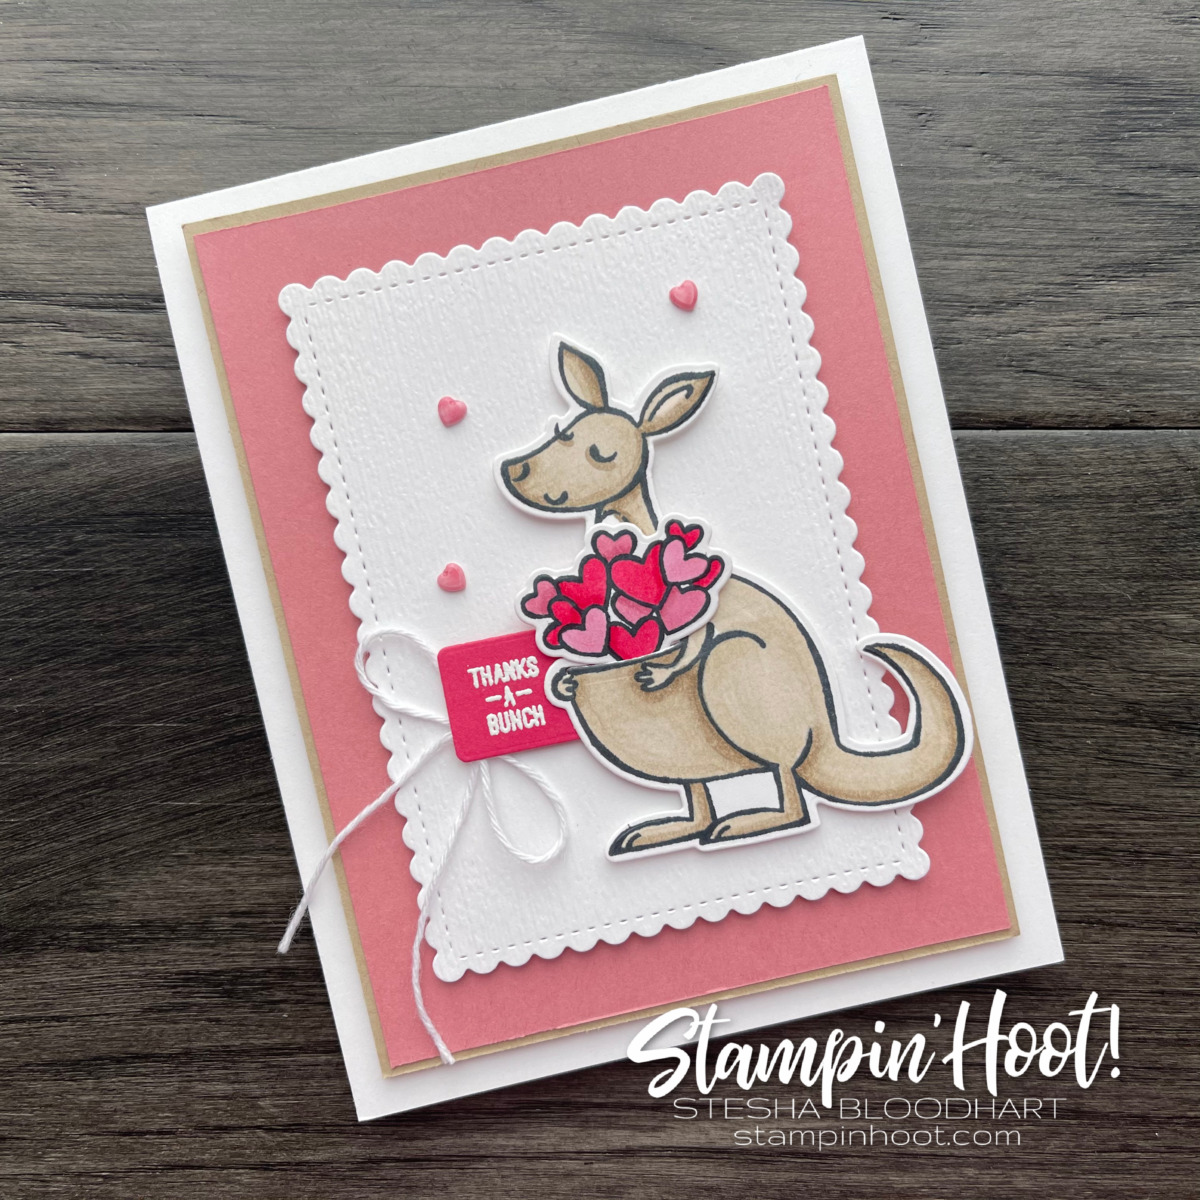 Kangaroo & Company Bundle by Stampin' Up! Simple Thank You Card created by Stesha Bloodhart, Stampin' Hoot. Stamp Review Crew